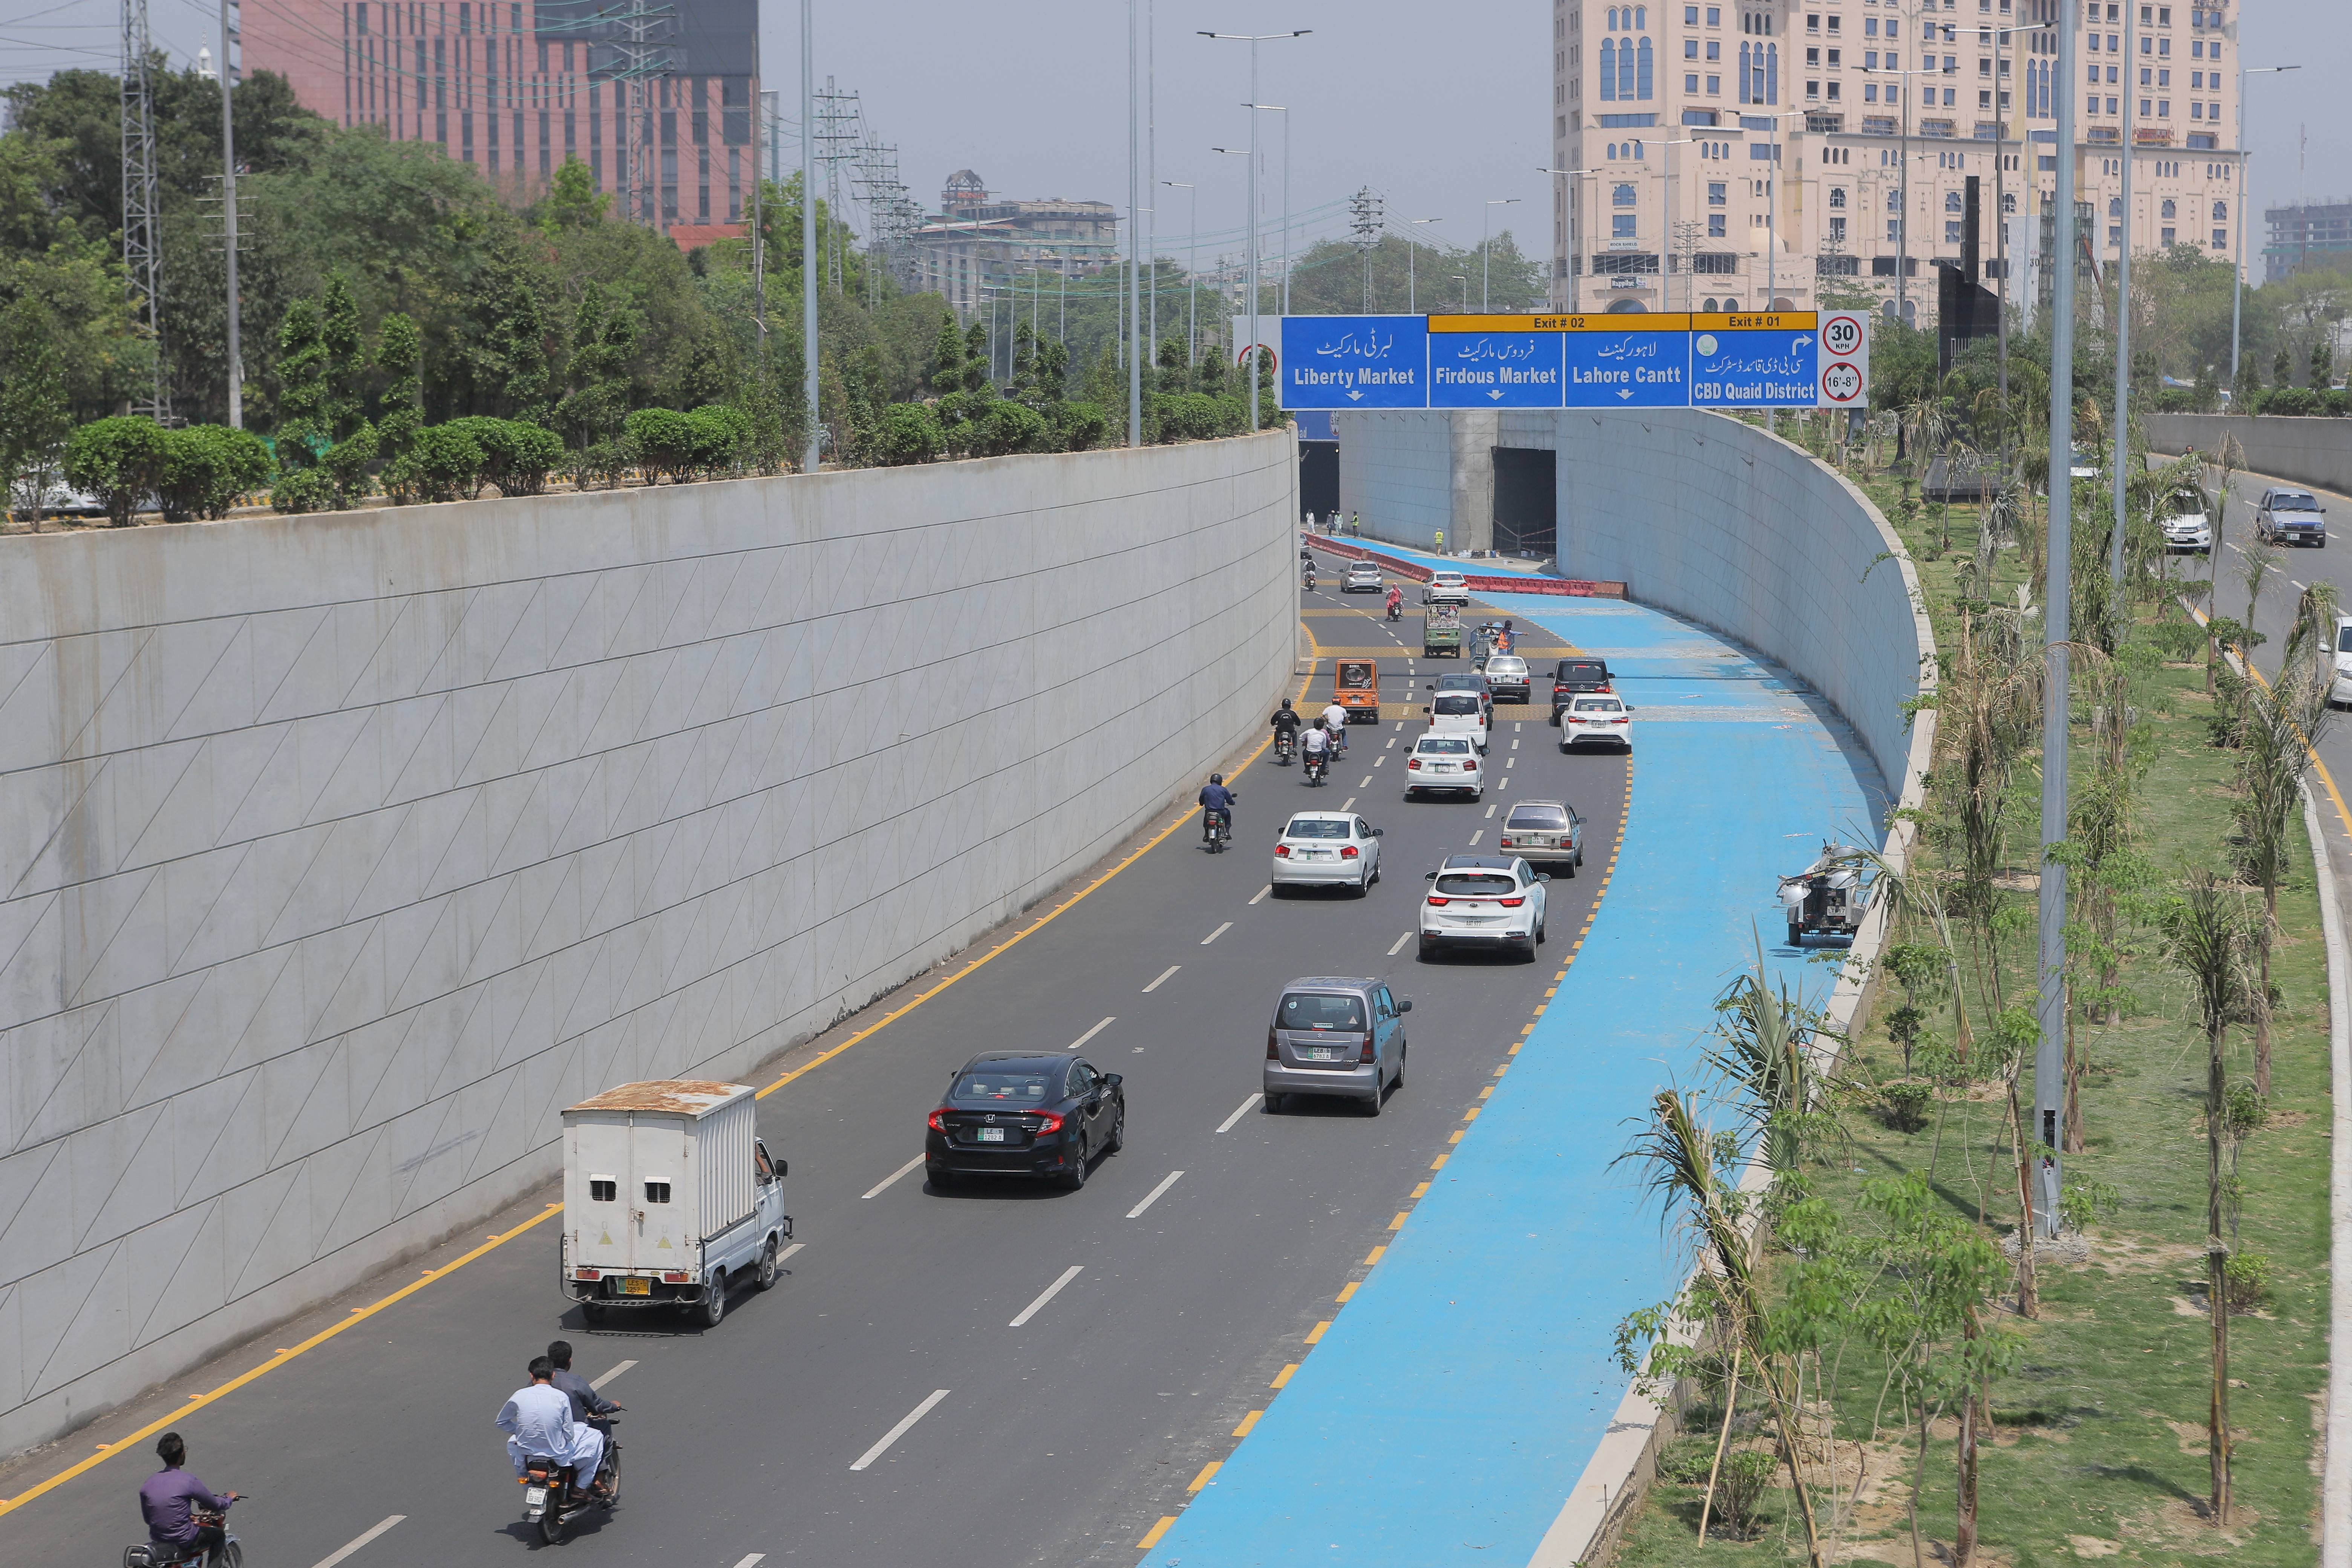 CBD PUNJAB INTRODUCES FIRST EVER ‘BLUE ROAD’ CONCEPT IN ASIA REGION FOR MODERNIZING LAHORE’S INFRASTRUCTURE